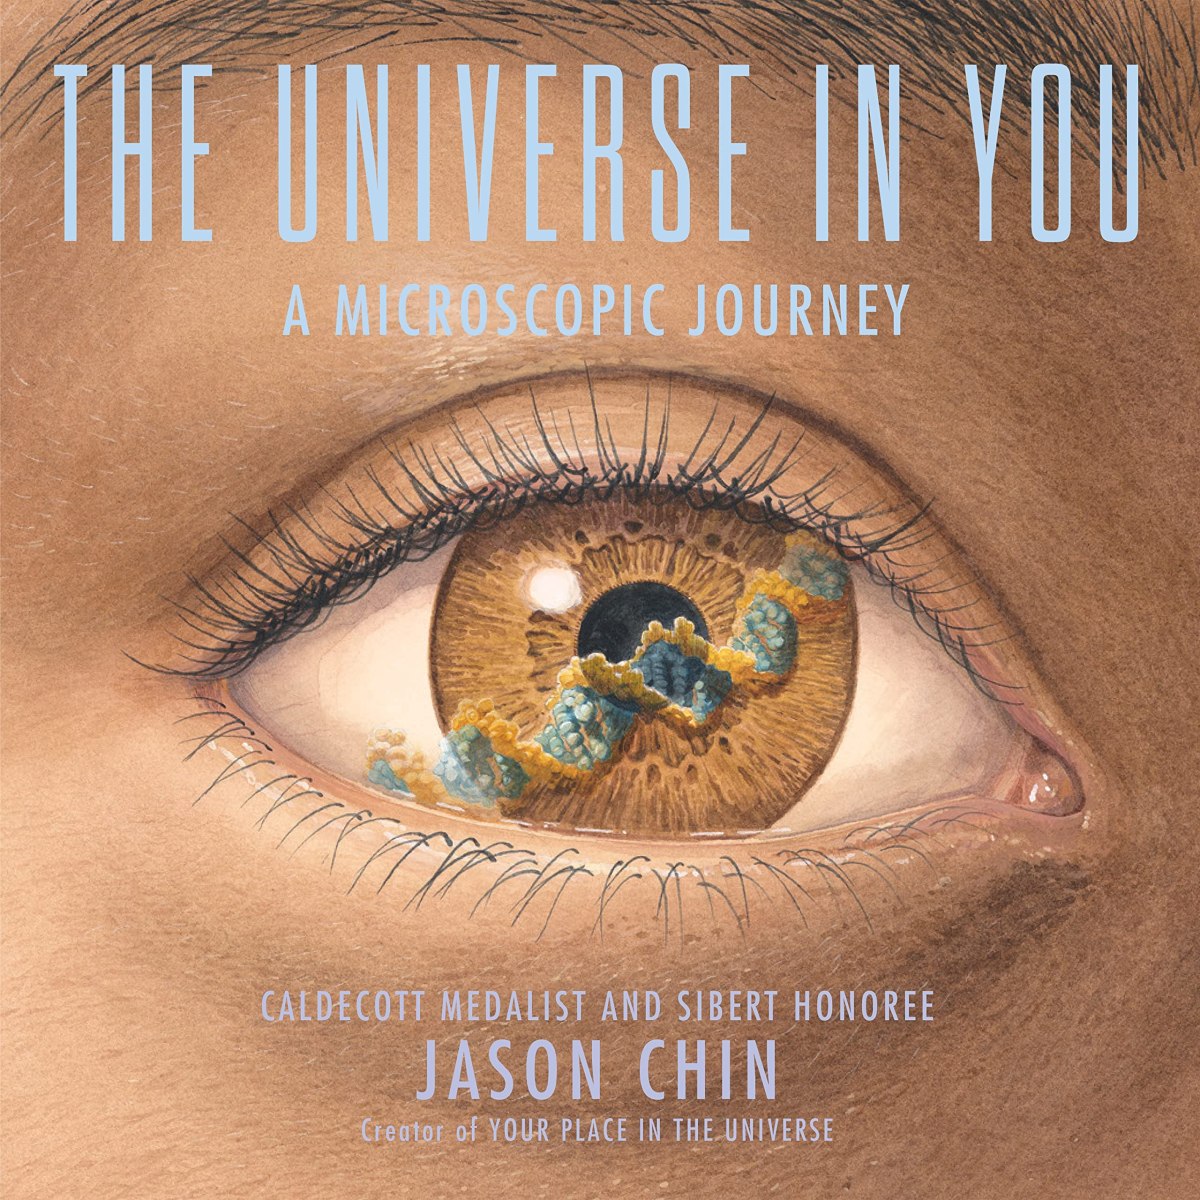 illustrated cover for children's book featured a close-up of a child's eye with a double helix across the iris, titled The Universe in You: A Microscopic Journey, Caldecott Medalist and Sibert Honoree Jason Chin, creator of Your Place in the Universe